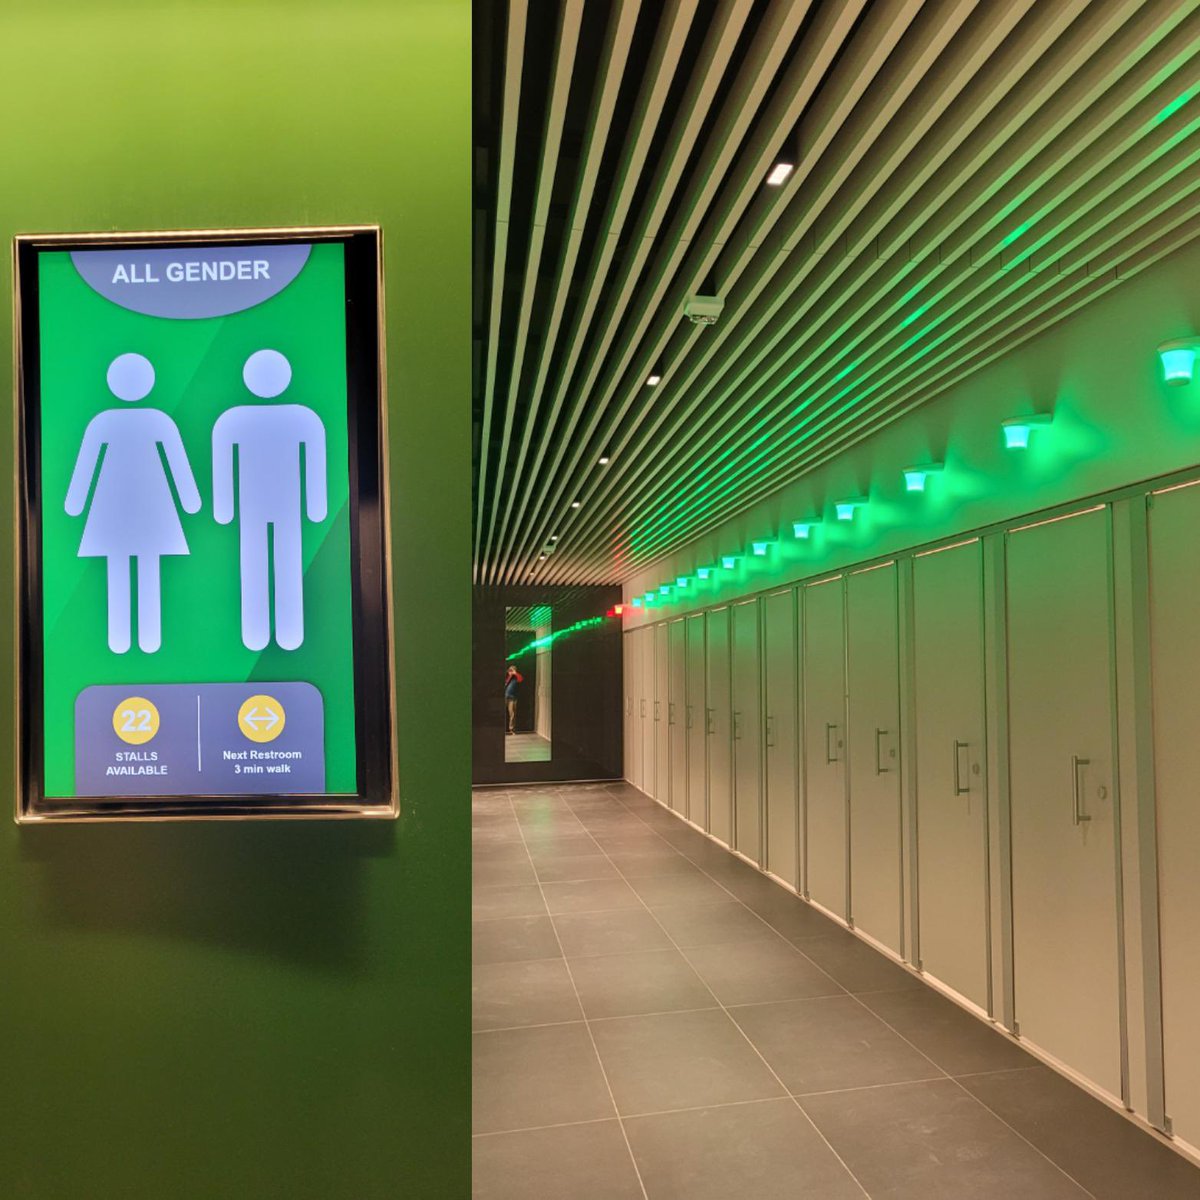 @morgonnm Hi, chair of the commission who helped craft this policy in Kansas City. First, these are single stall, all gender bathrooms that allow for greater privacy. There are gender specific bathrooms down the hall too. Finally, don’t use my community to create fake outrage—it’s sad.